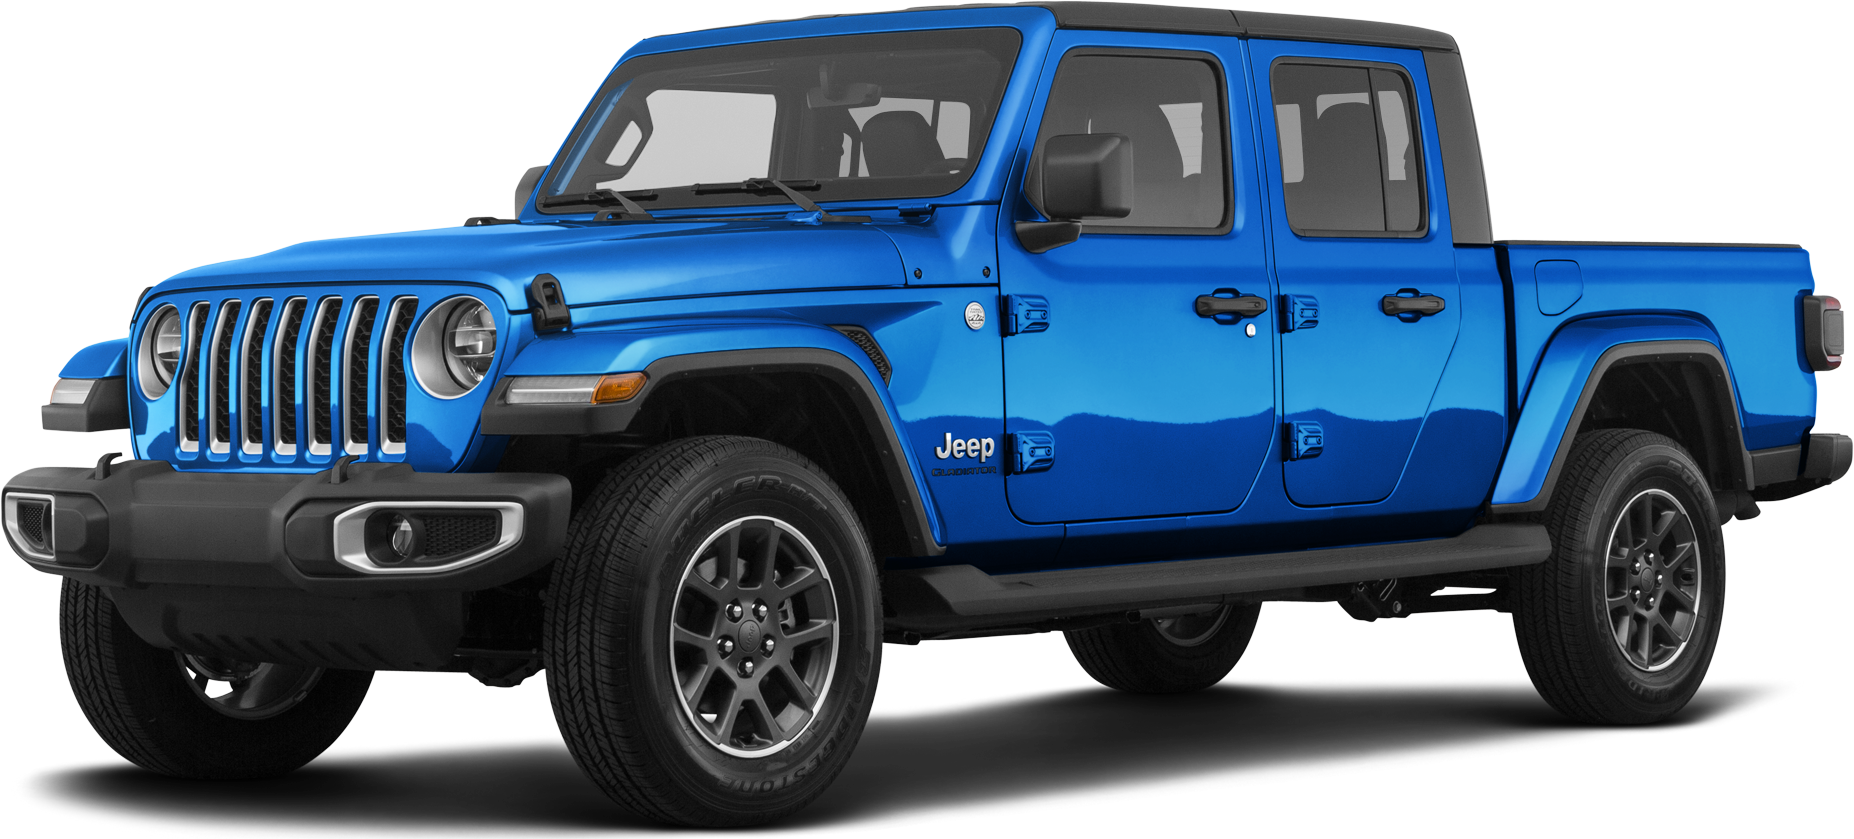 New 2022 Jeep Gladiator Reviews, Pricing & Specs | Kelley Blue Book